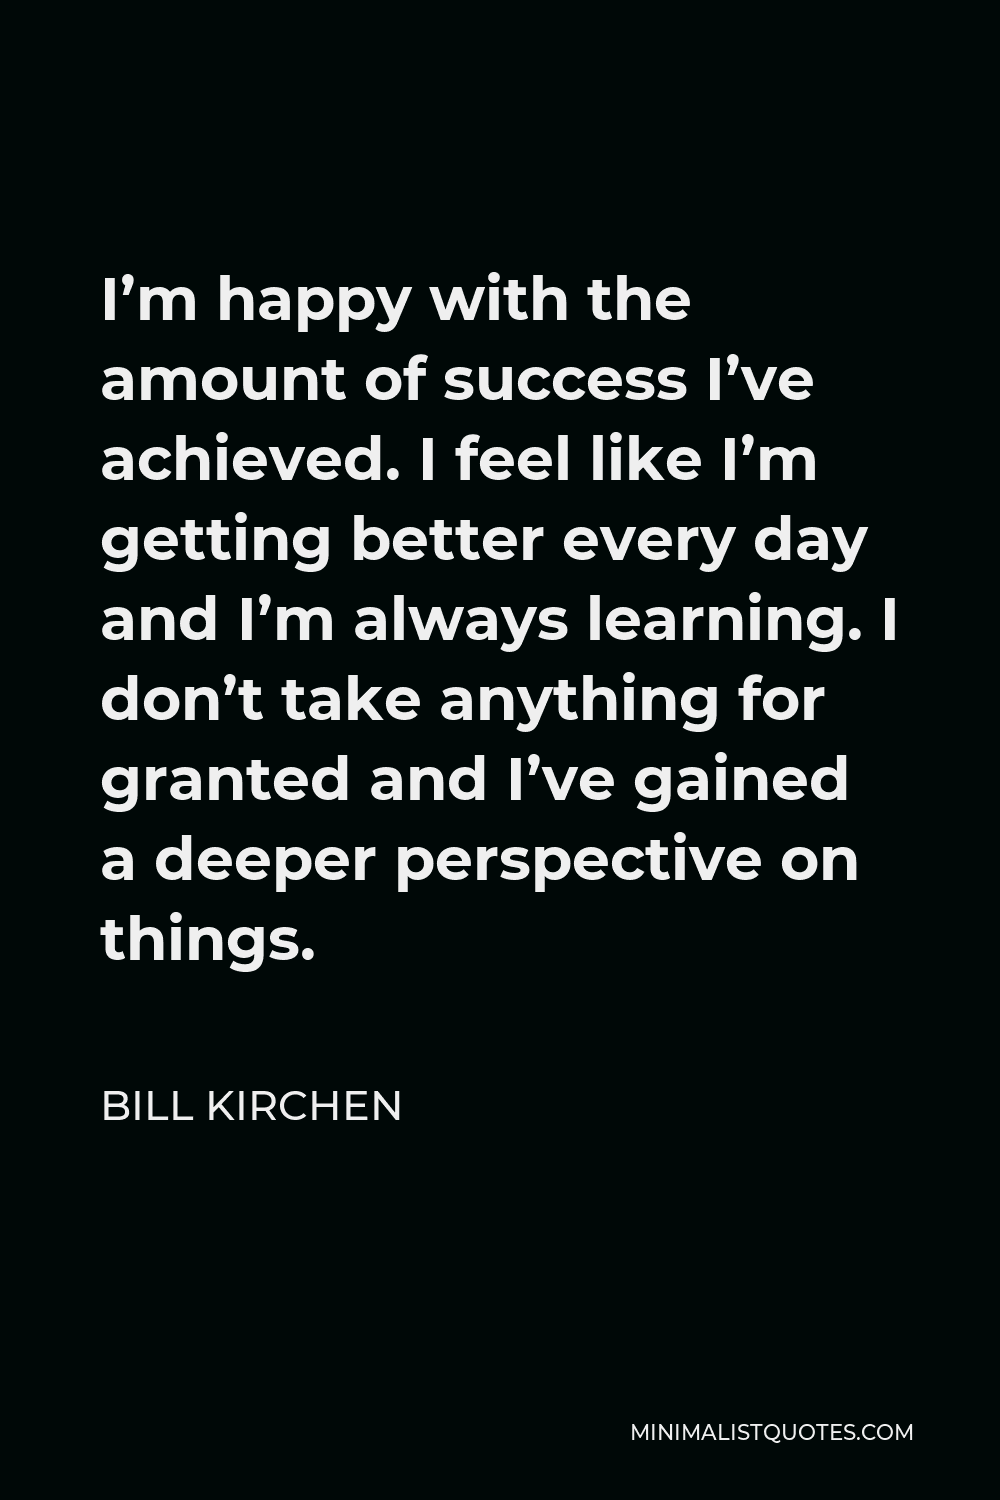 Bill Kirchen Quote - I’m happy with the amount of success I’ve achieved. I feel like I’m getting better every day and I’m always learning. I don’t take anything for granted and I’ve gained a deeper perspective on things.